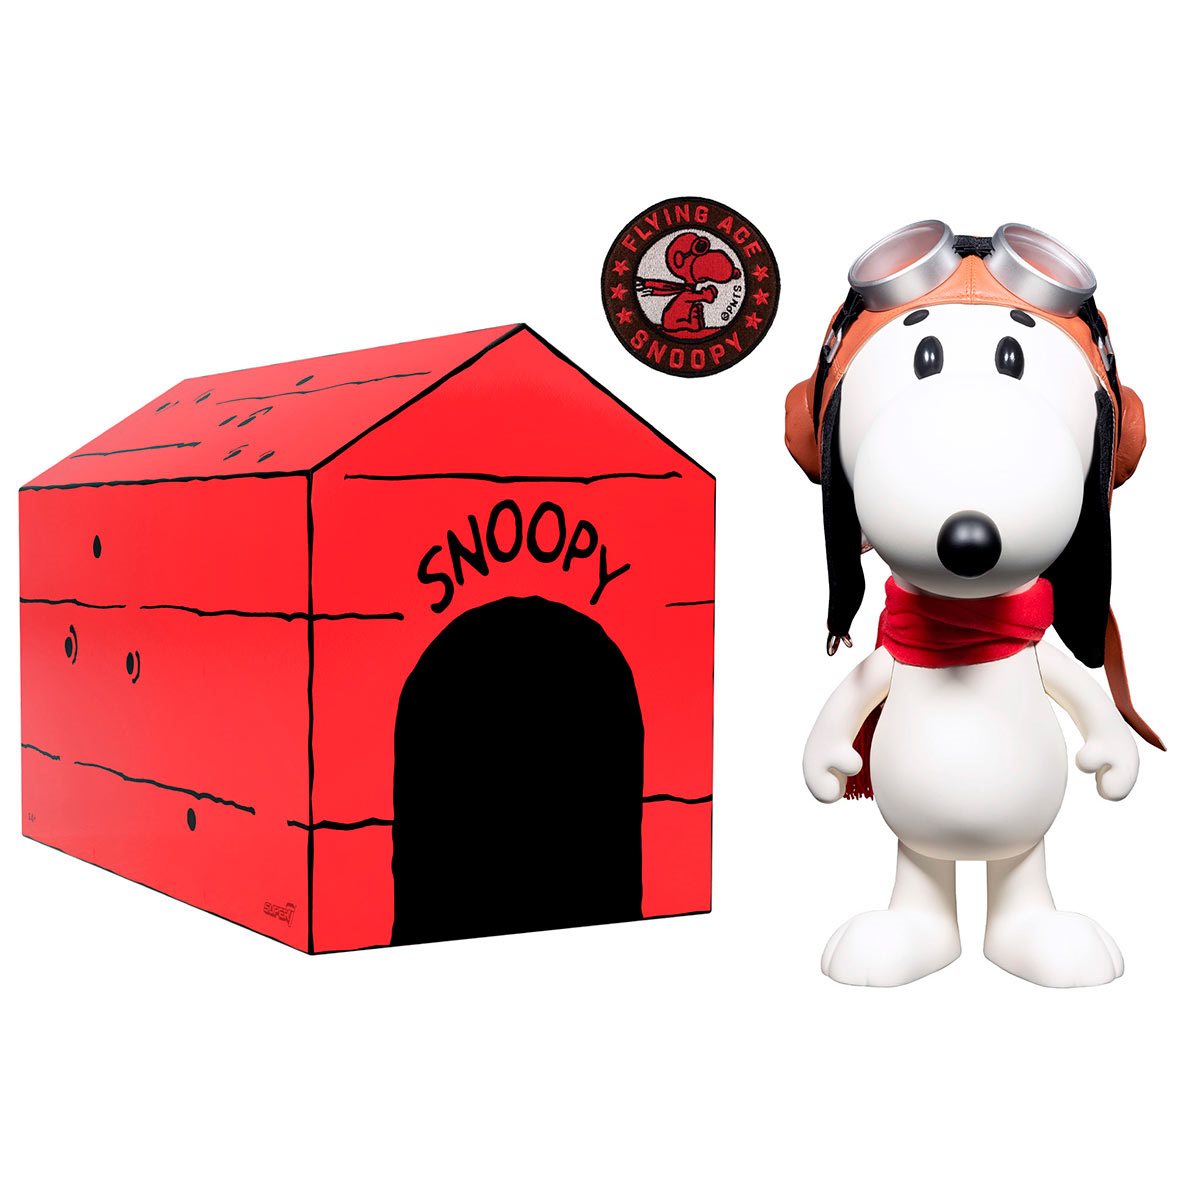 charlie brown snoopy red baron